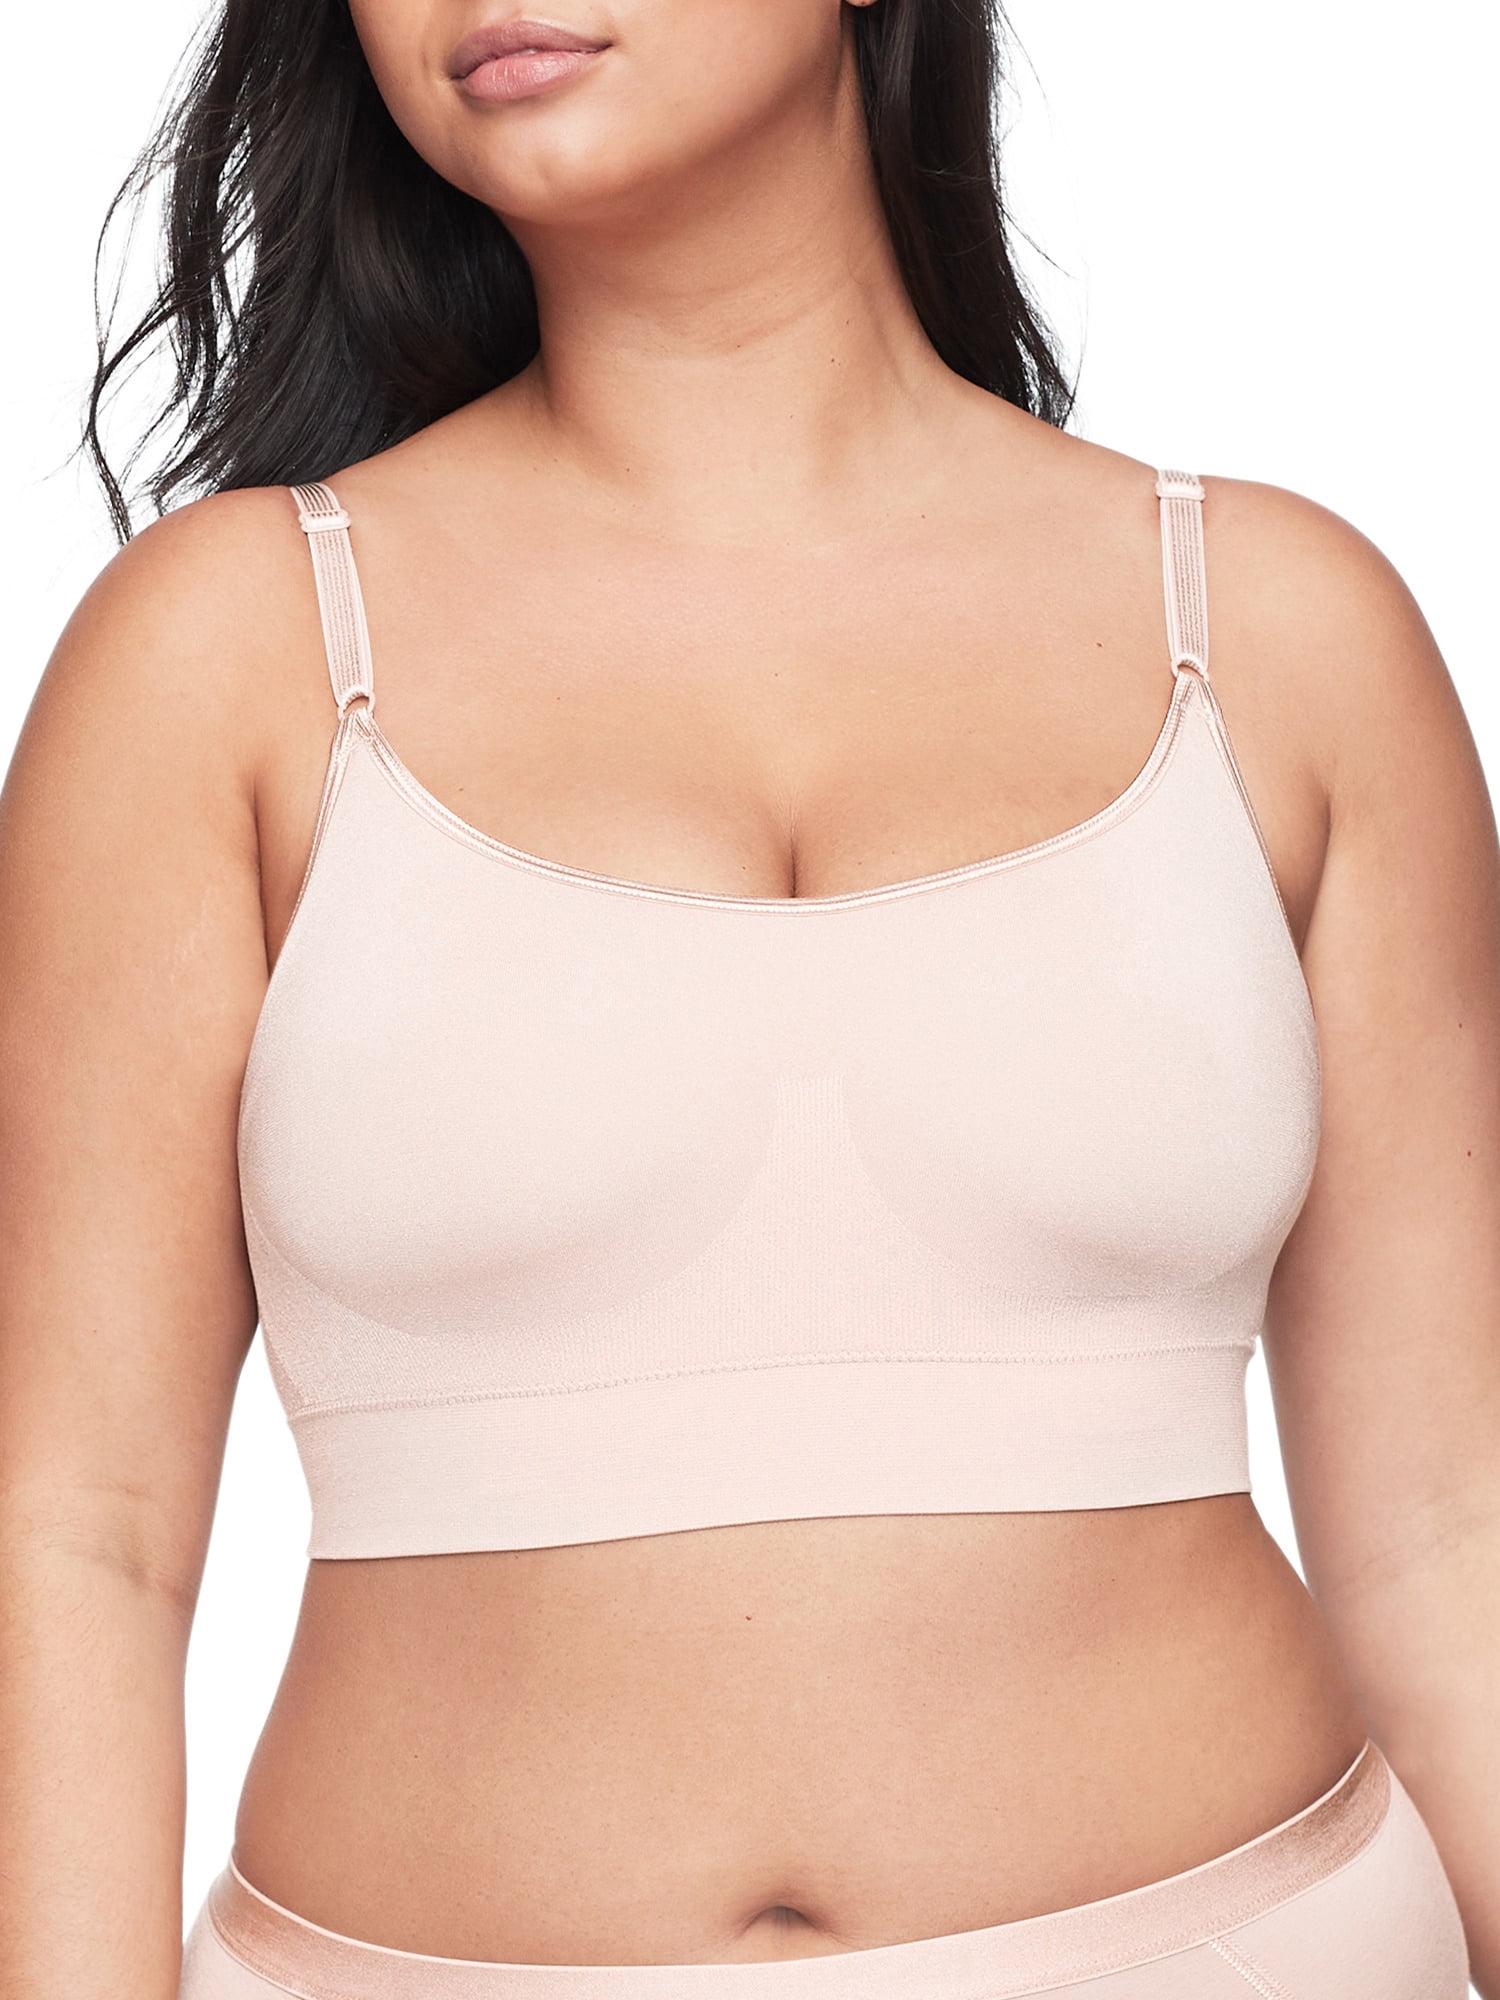 Warners Bra Rm3911a  Free and Faster Shipping on AliExpress